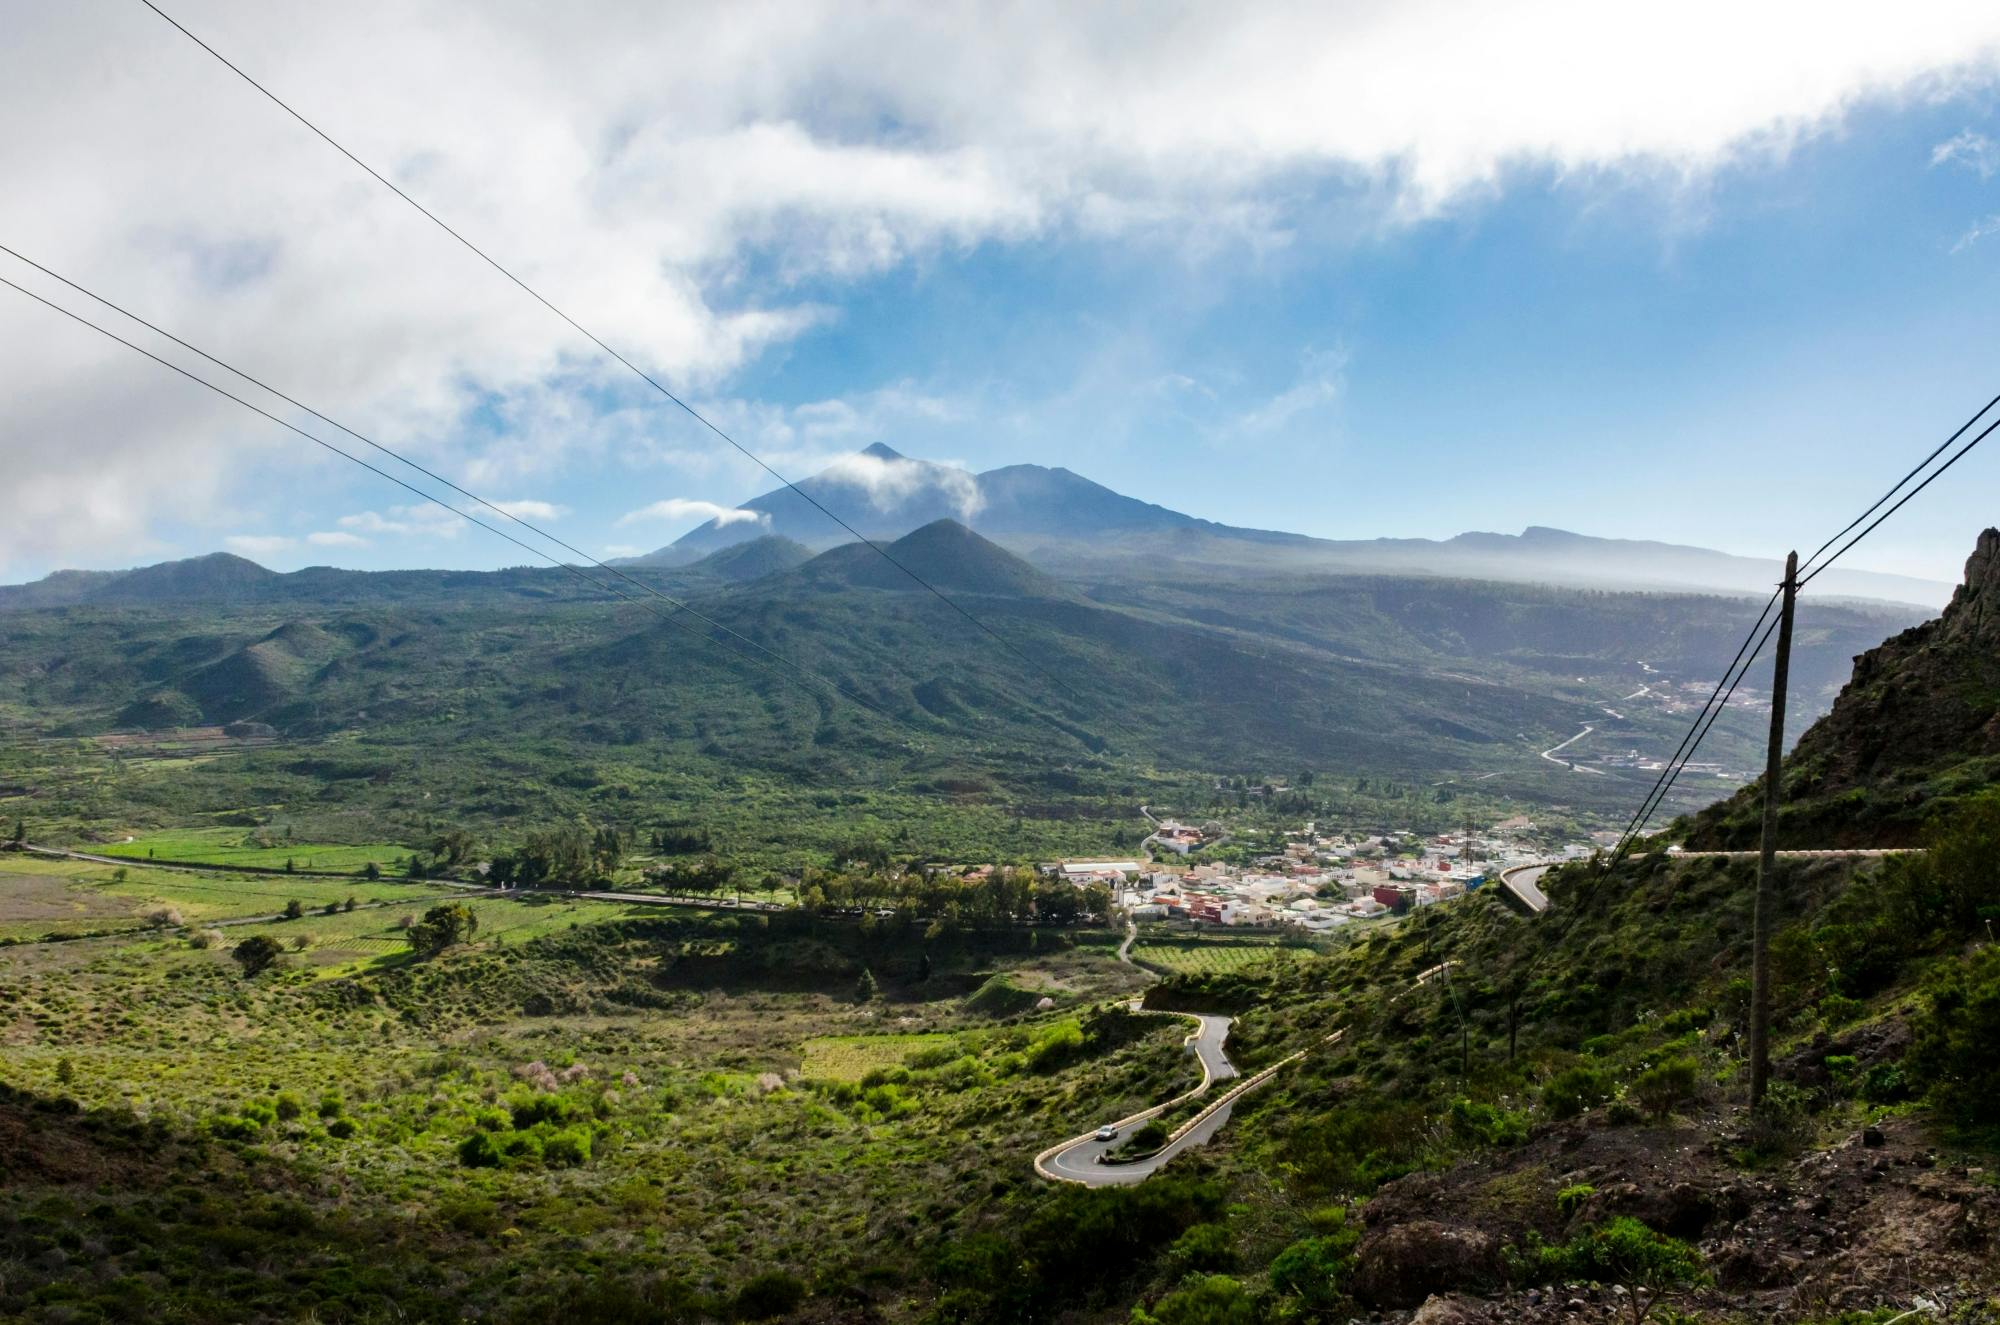 Masca, Teno and Rural Tenerife Tour from the North